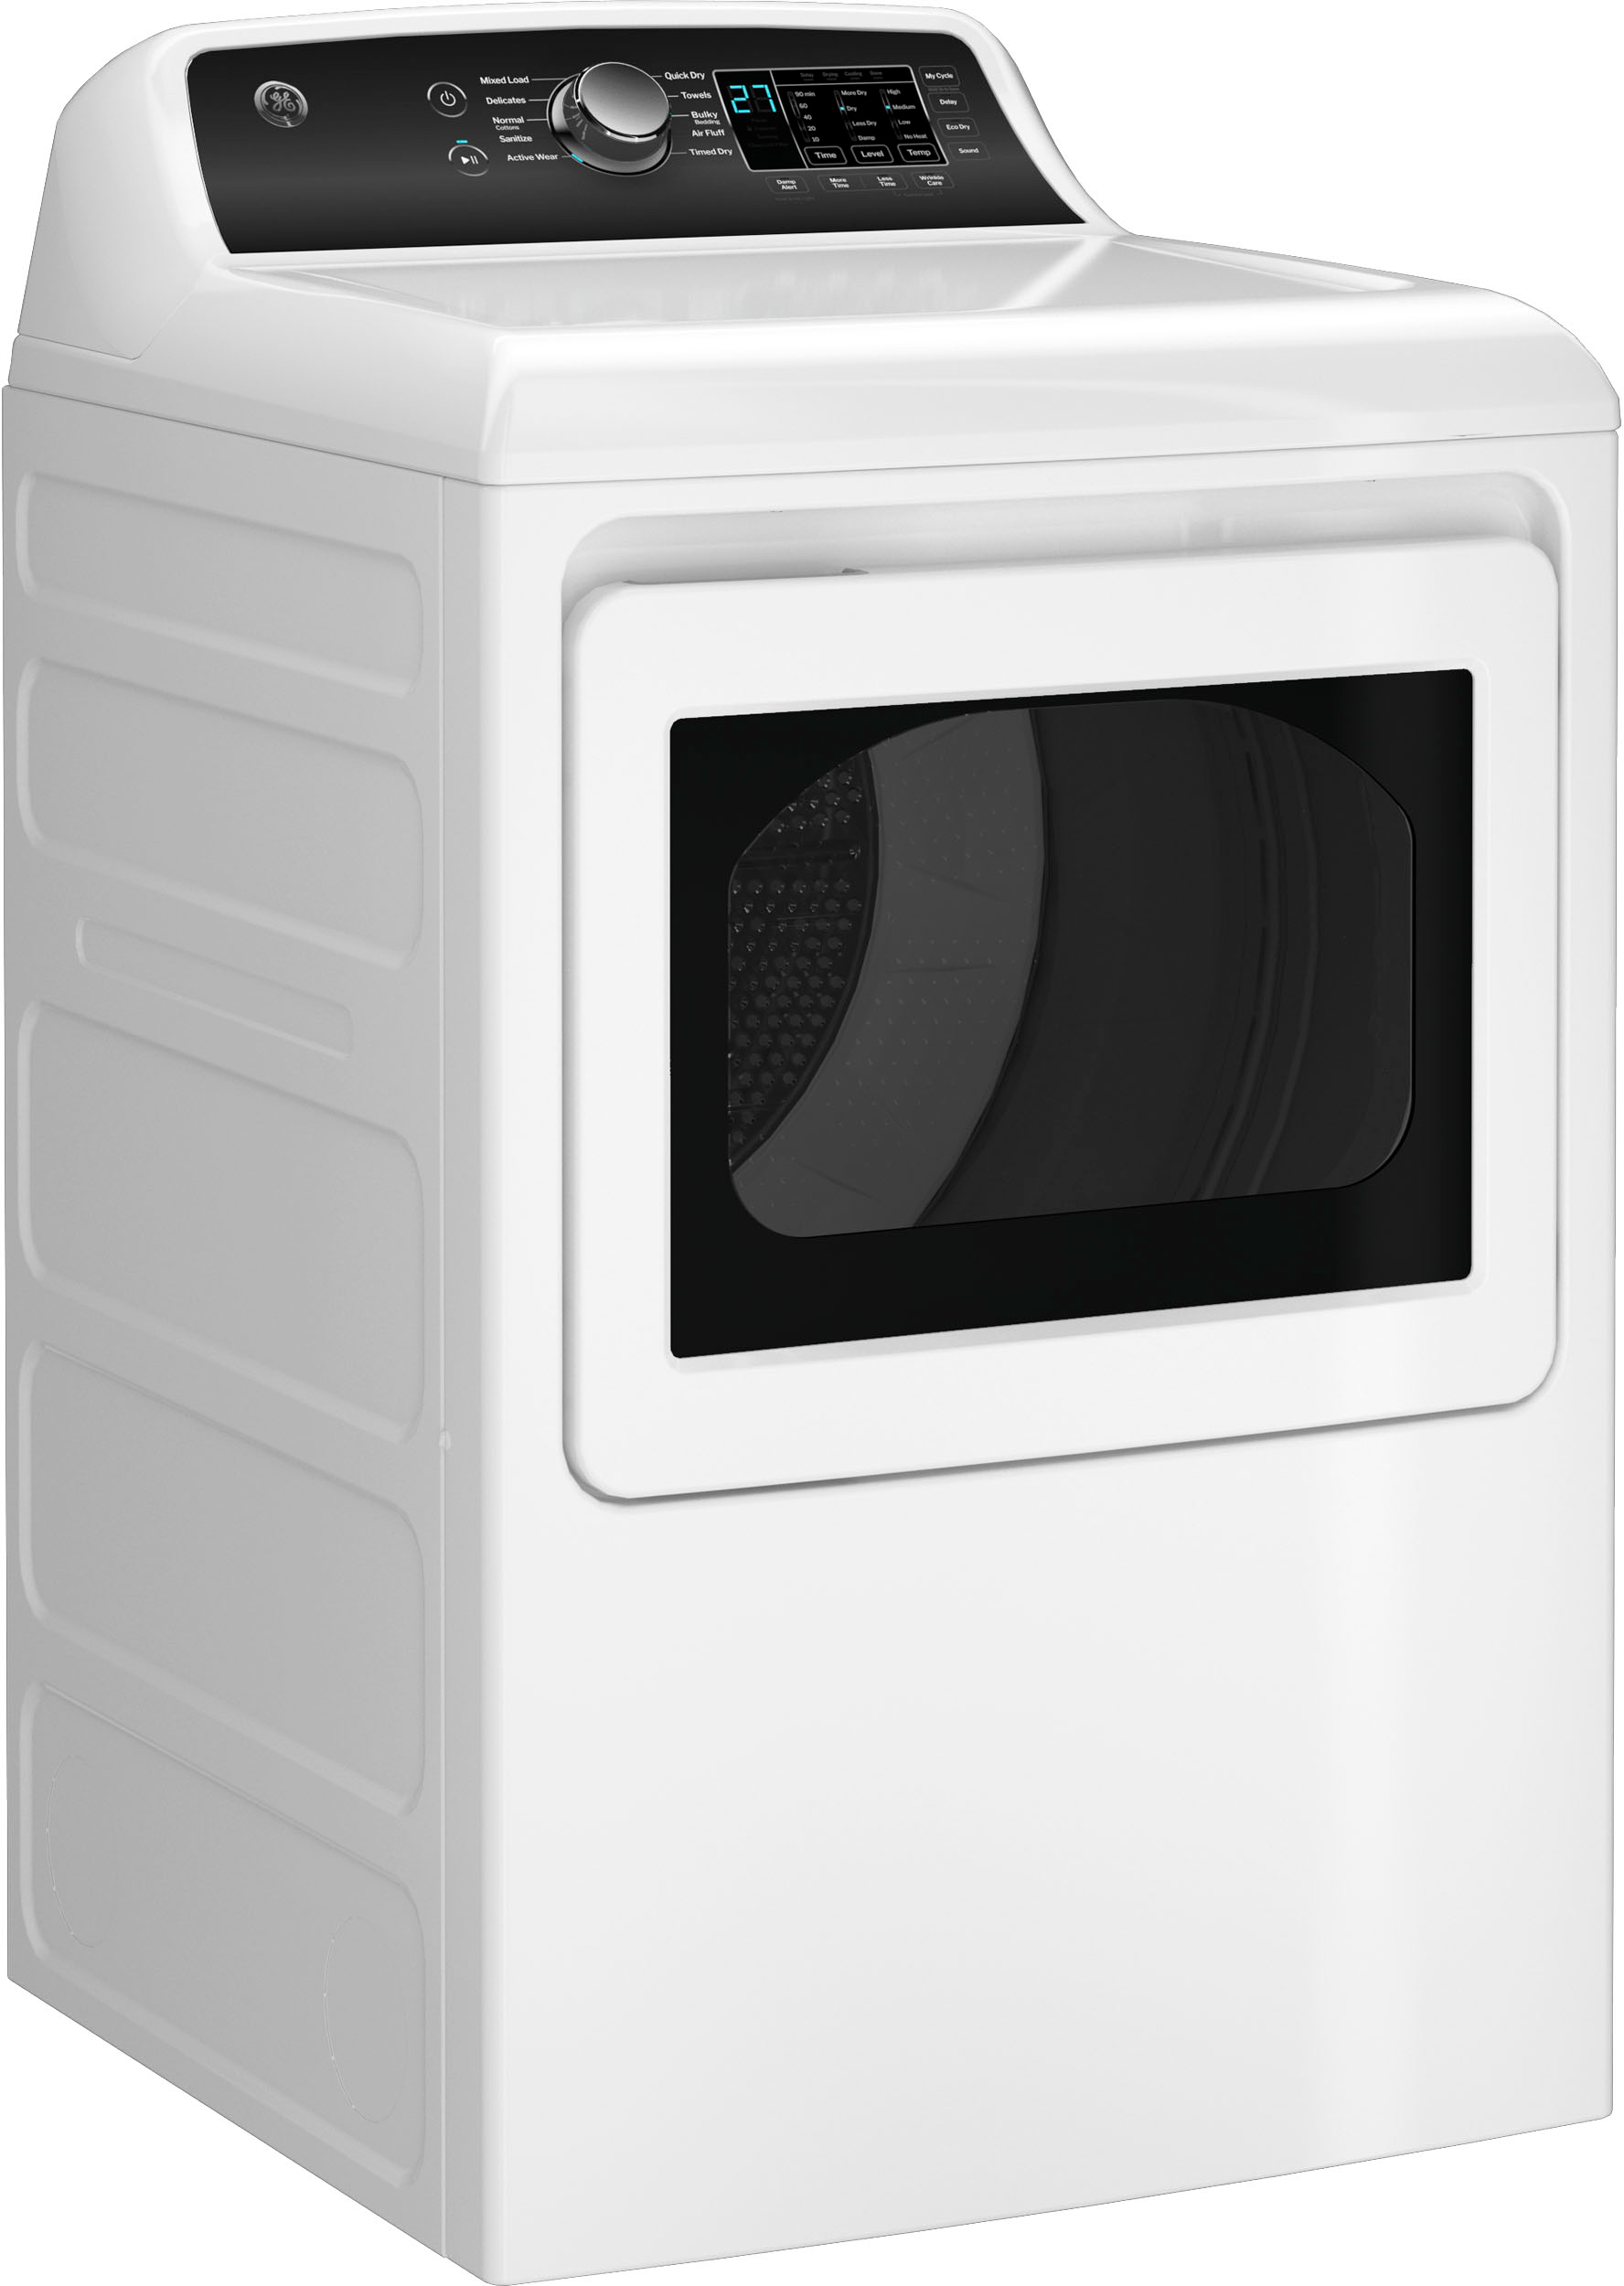 Angle View: GE - 3.9 Cu. Ft. Top Load Washer and 5.9 Cu.Ft Electric Dryer Laundry Center - White